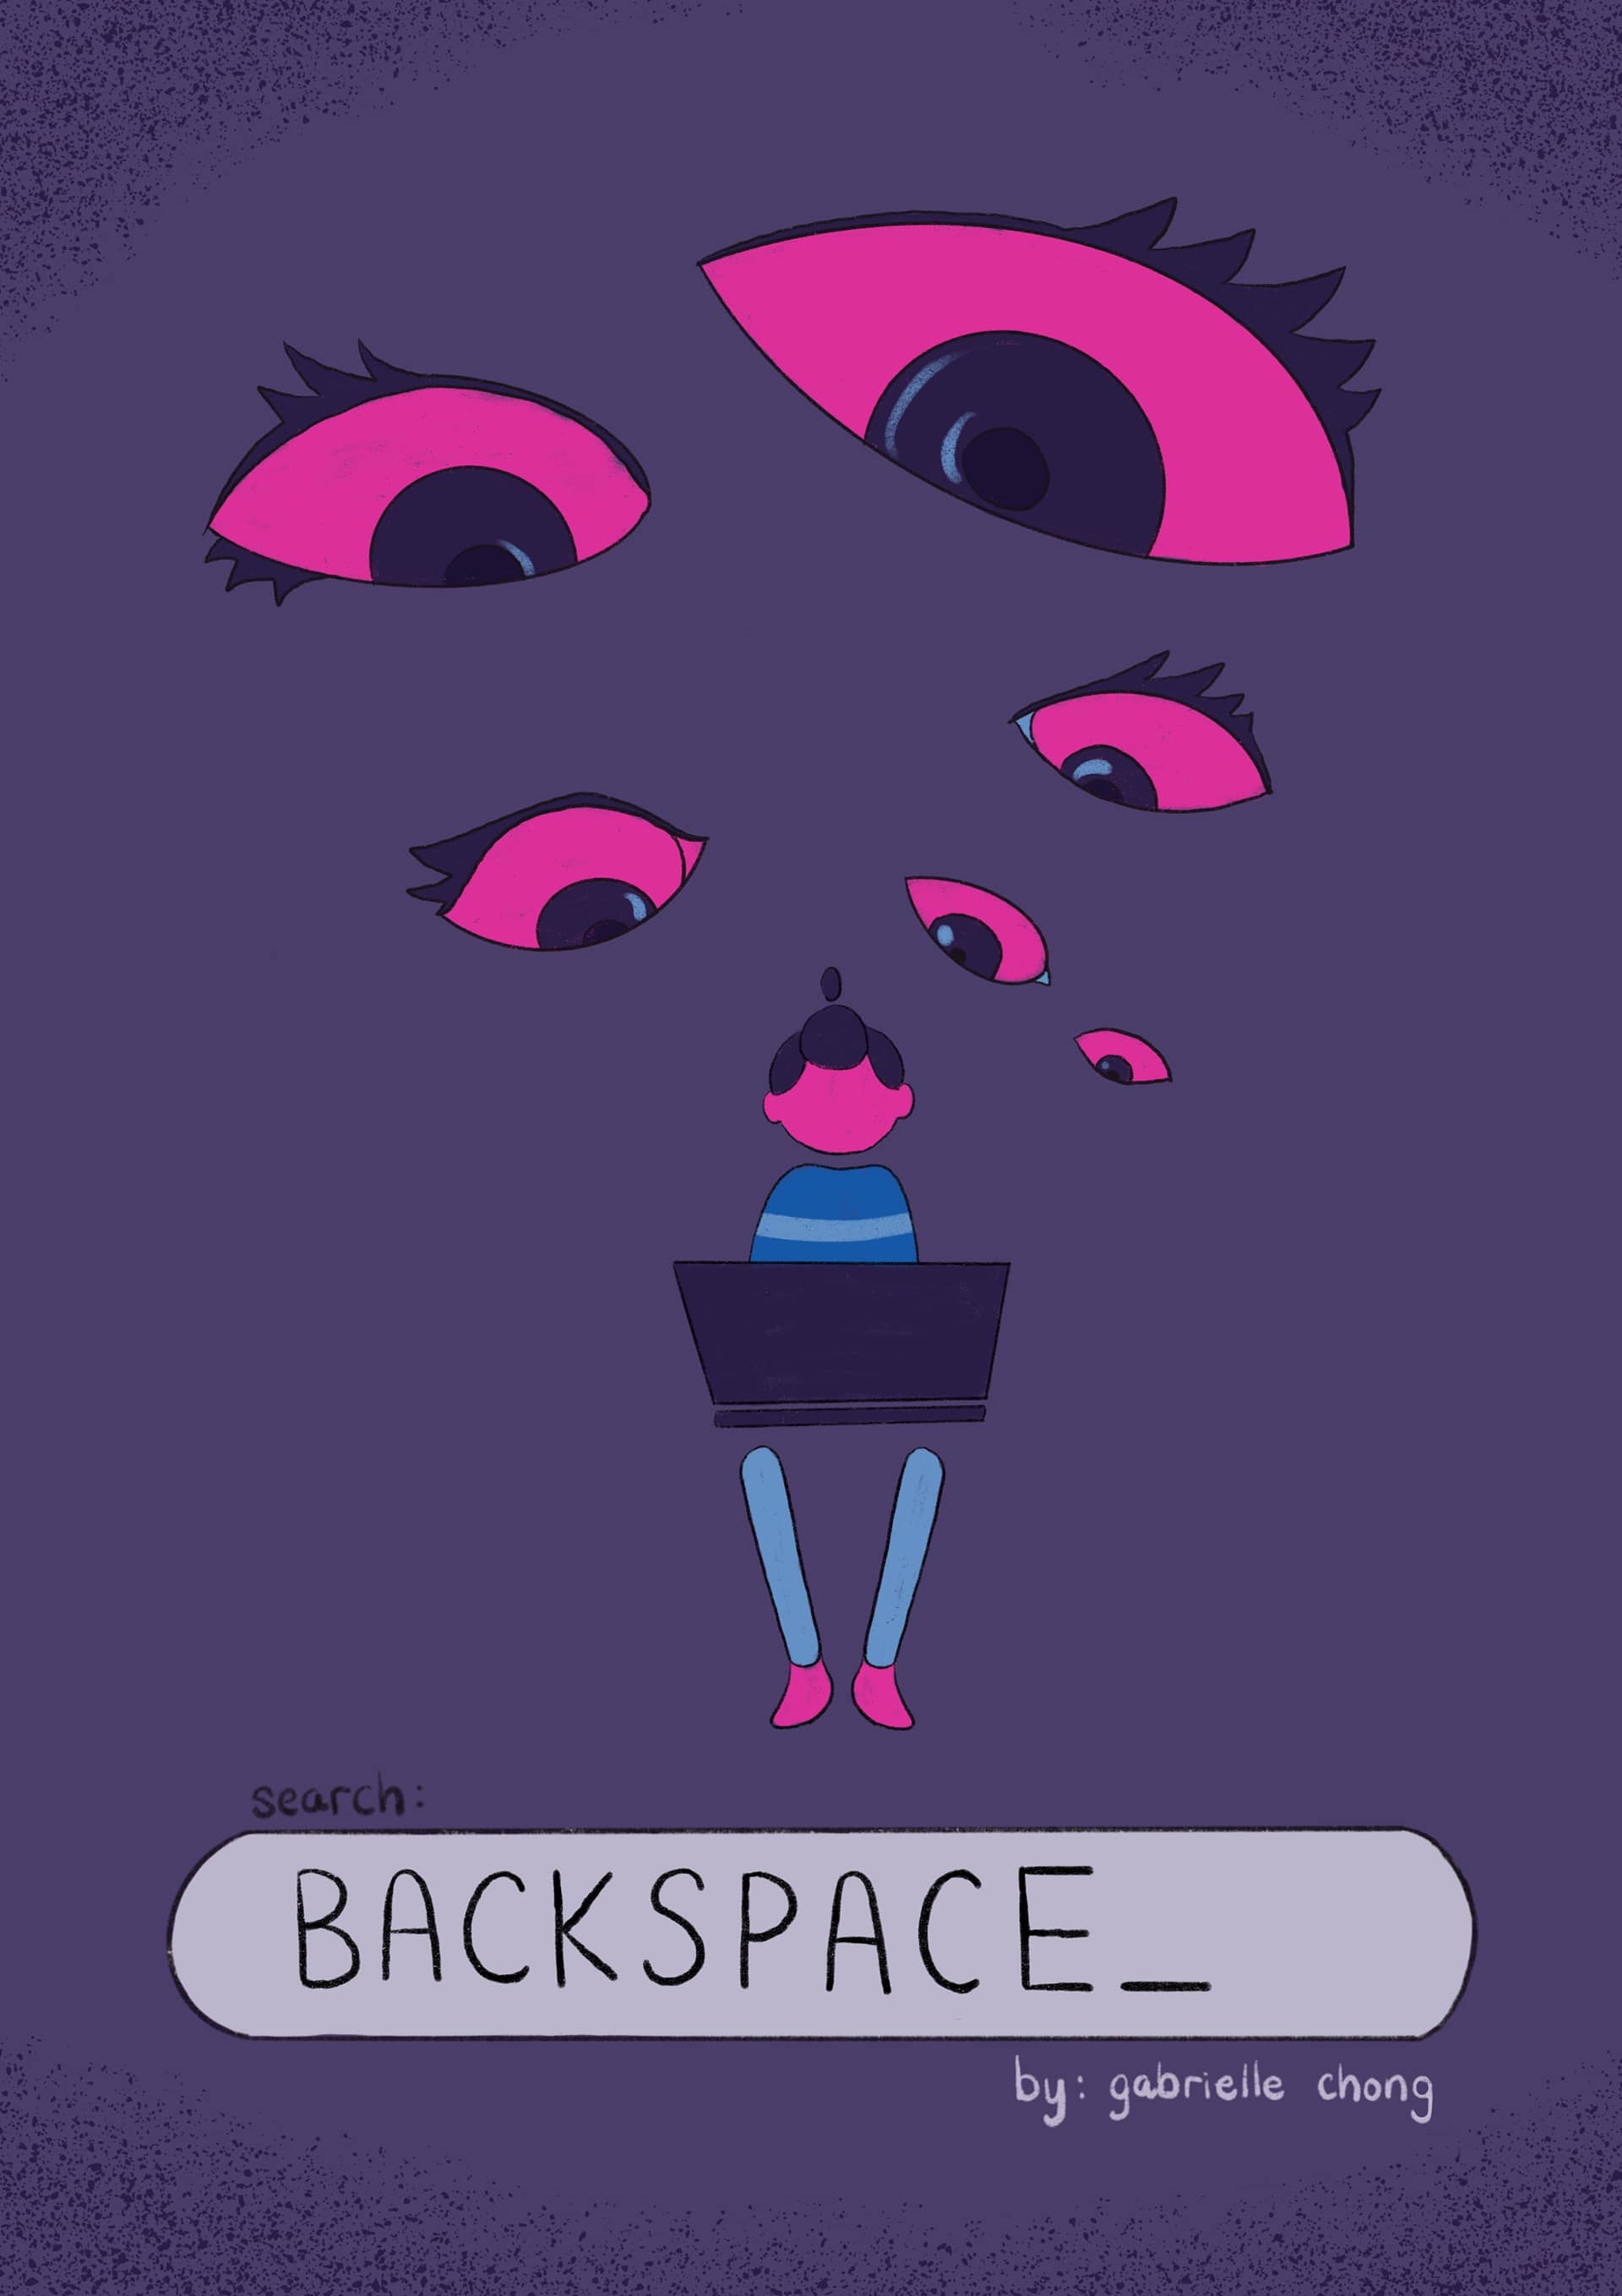 Backspace poster, illustration of a person with a laptop, multiple eyes looking on